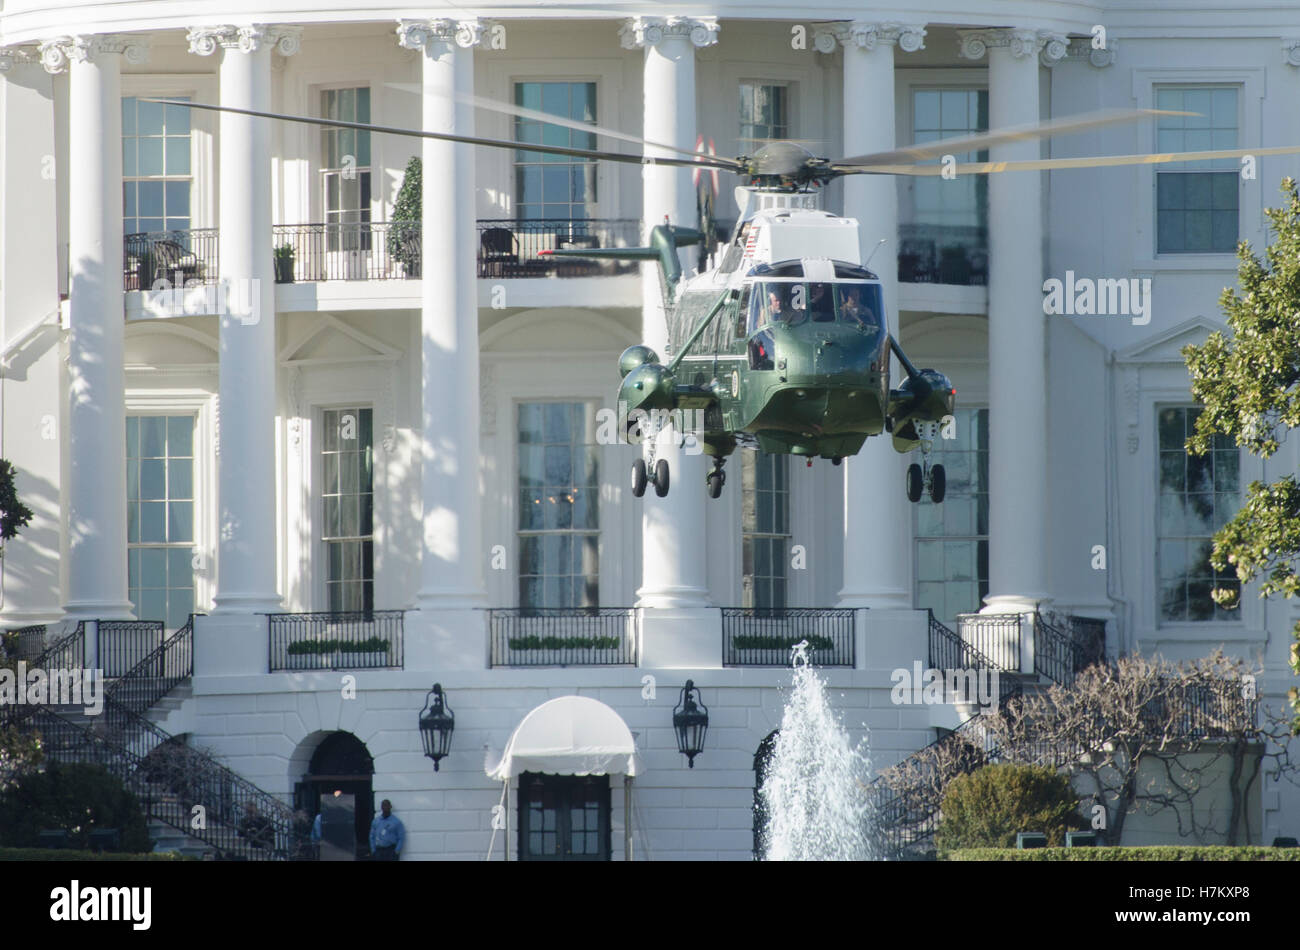 Marine helicopter lifts off from the South Lawn of the White House, Stock Photo